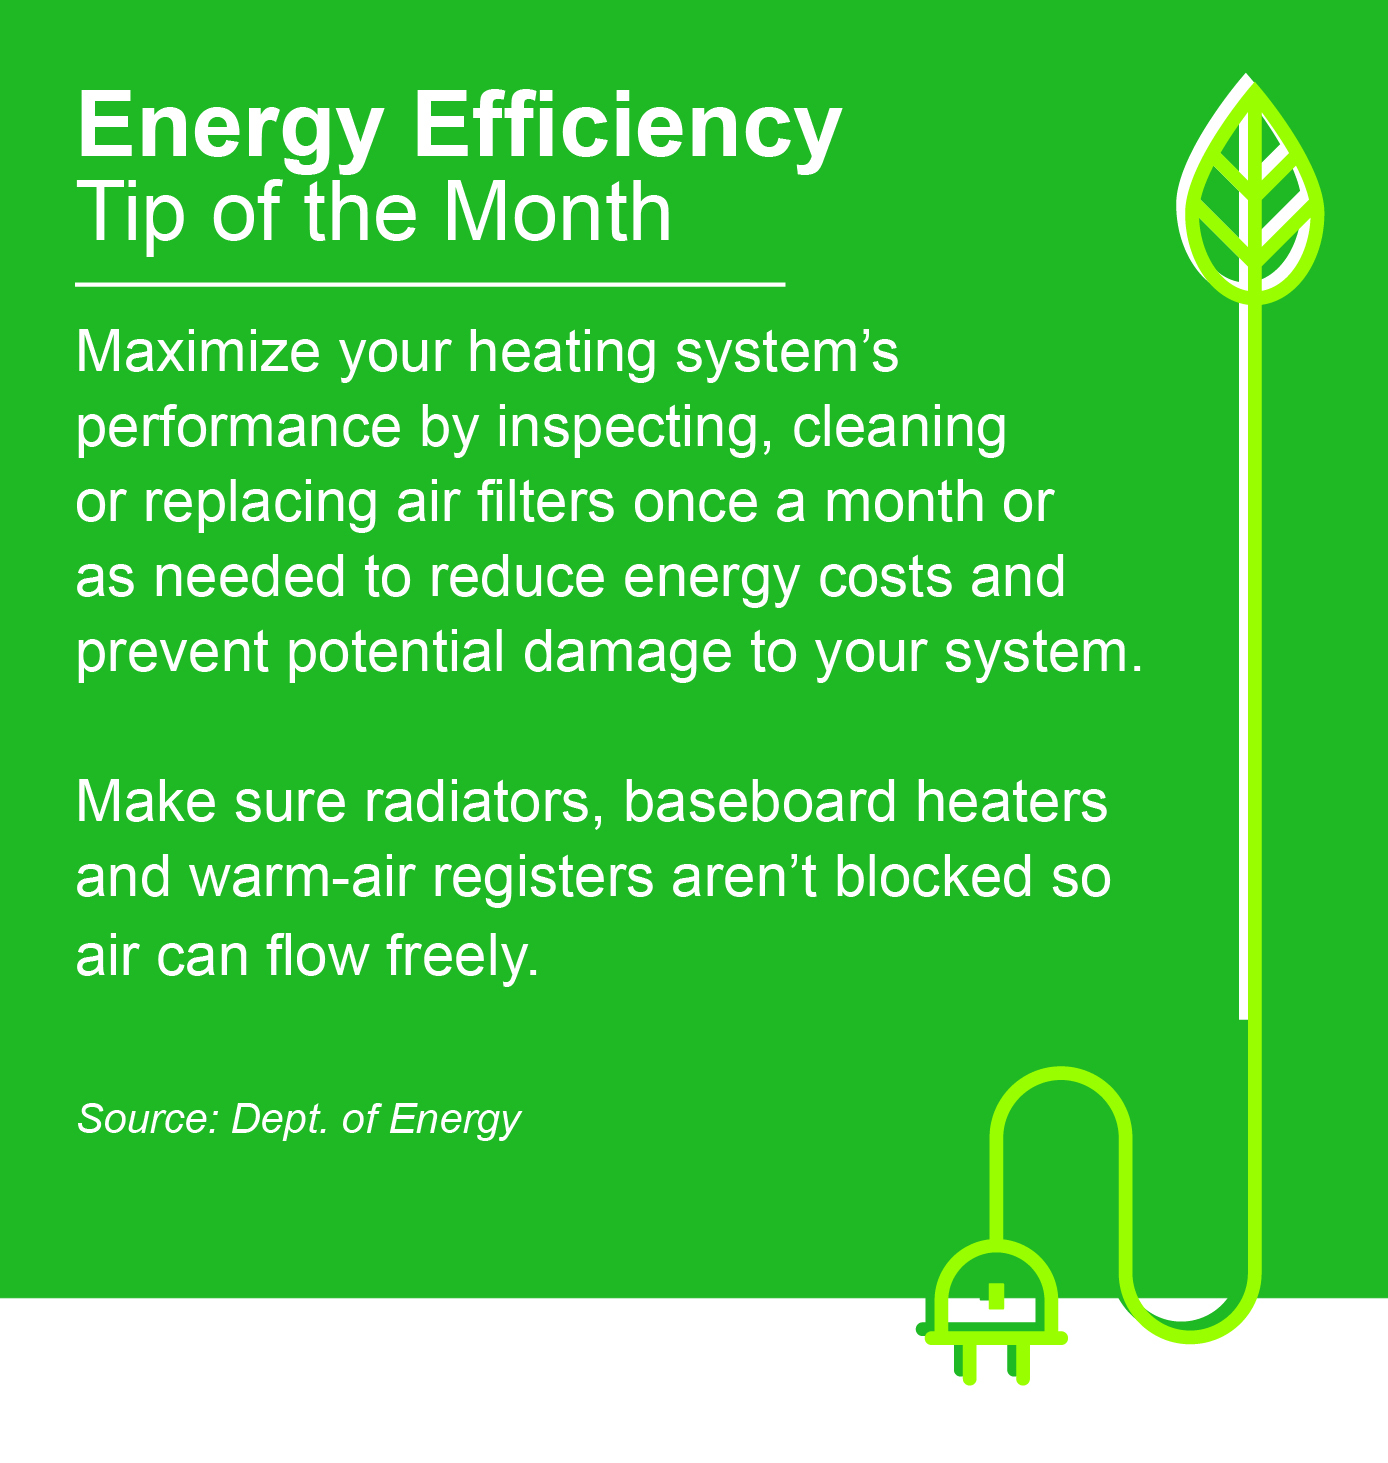 ENERGY EFFICIENCY TIP OF THE MONTH: Maximize your heating system's performance by inspecting, cleaning, or replacing air filters once a month or as needed to reduce energy costs and prevent potential damage to your system. Make sure radiators, baseboard heaters, and warm-air registers aren't blocked so air can flow freely.